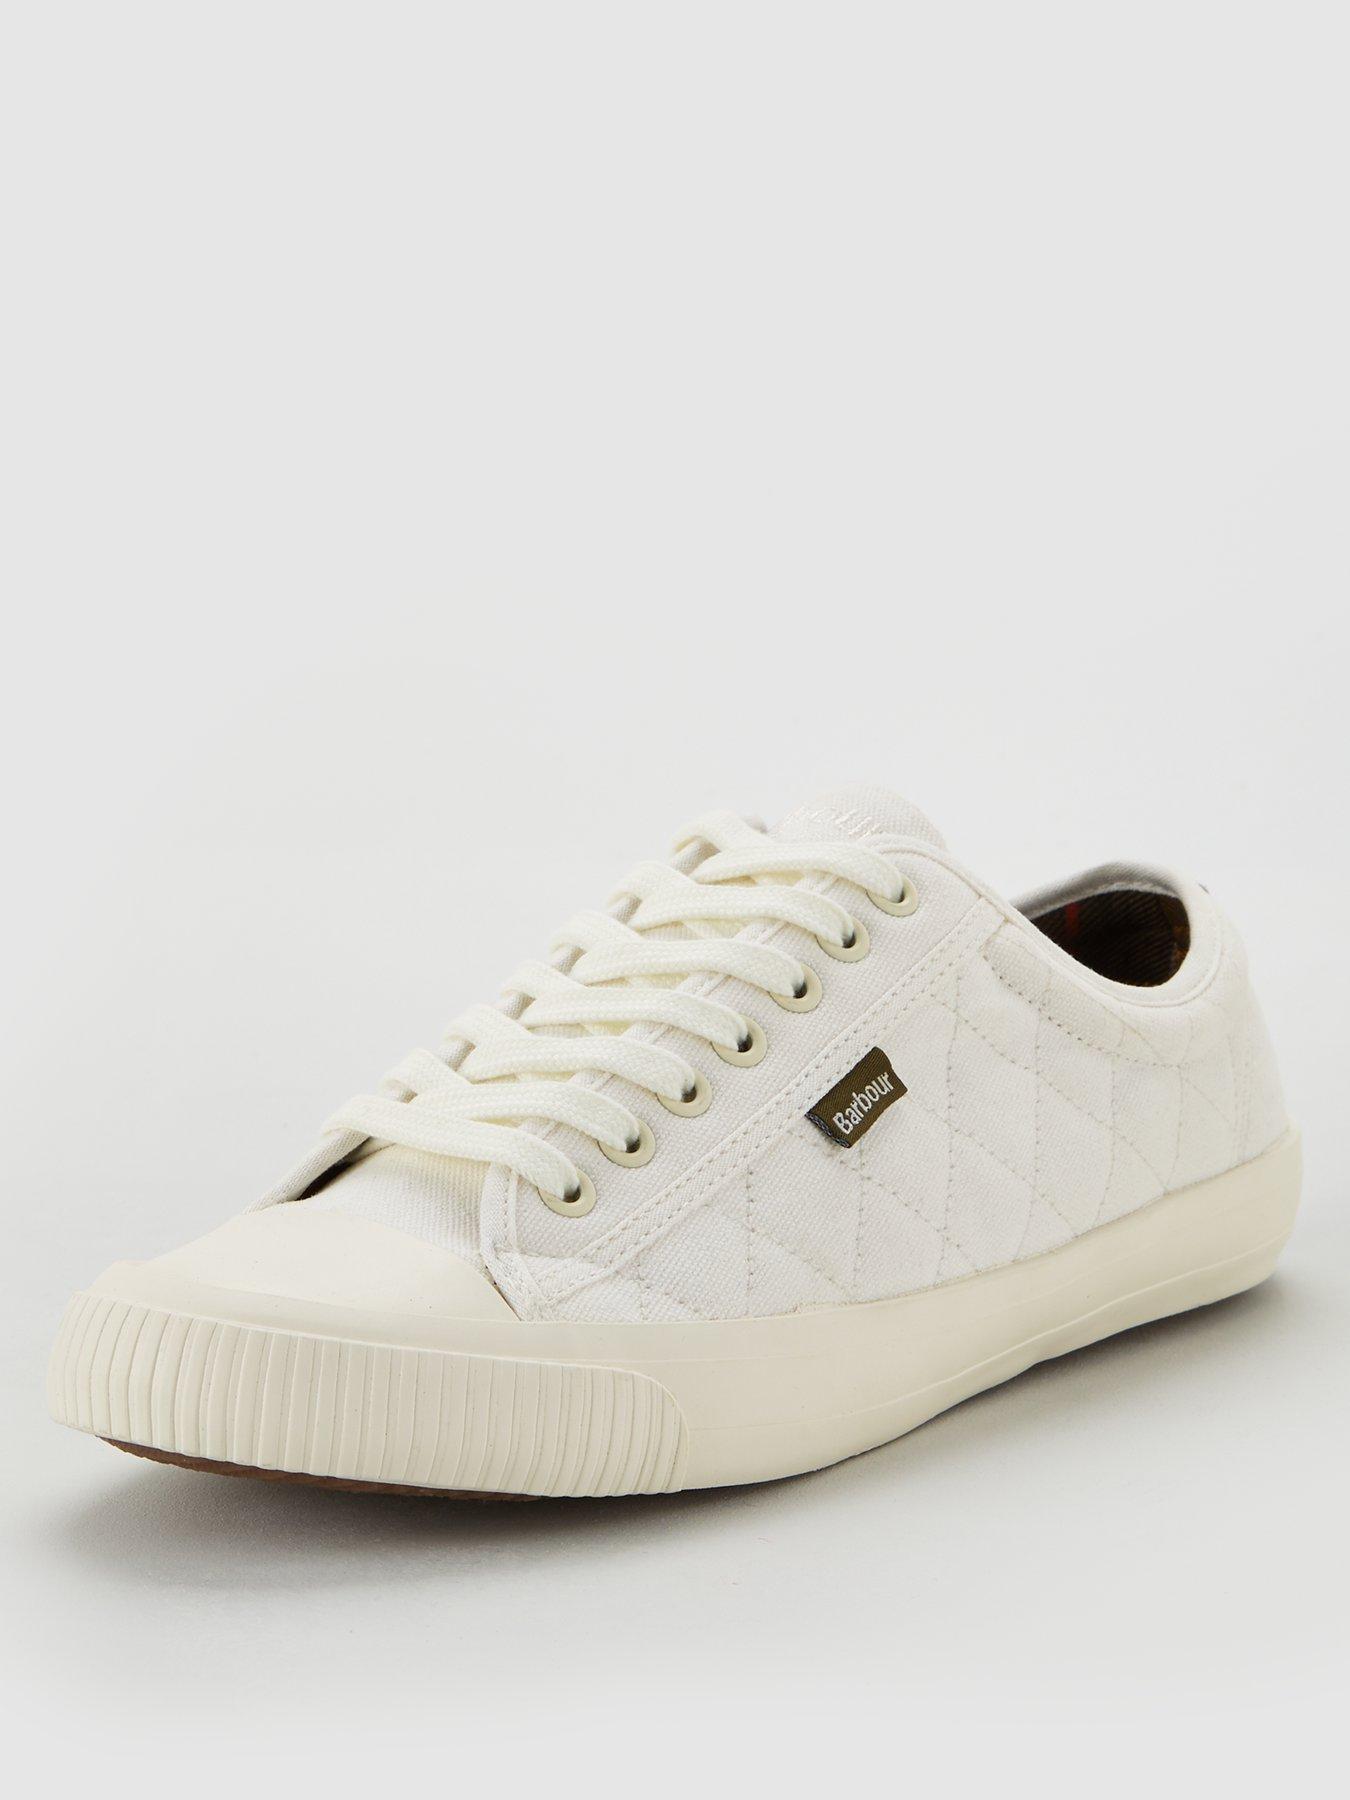 barbour white trainers